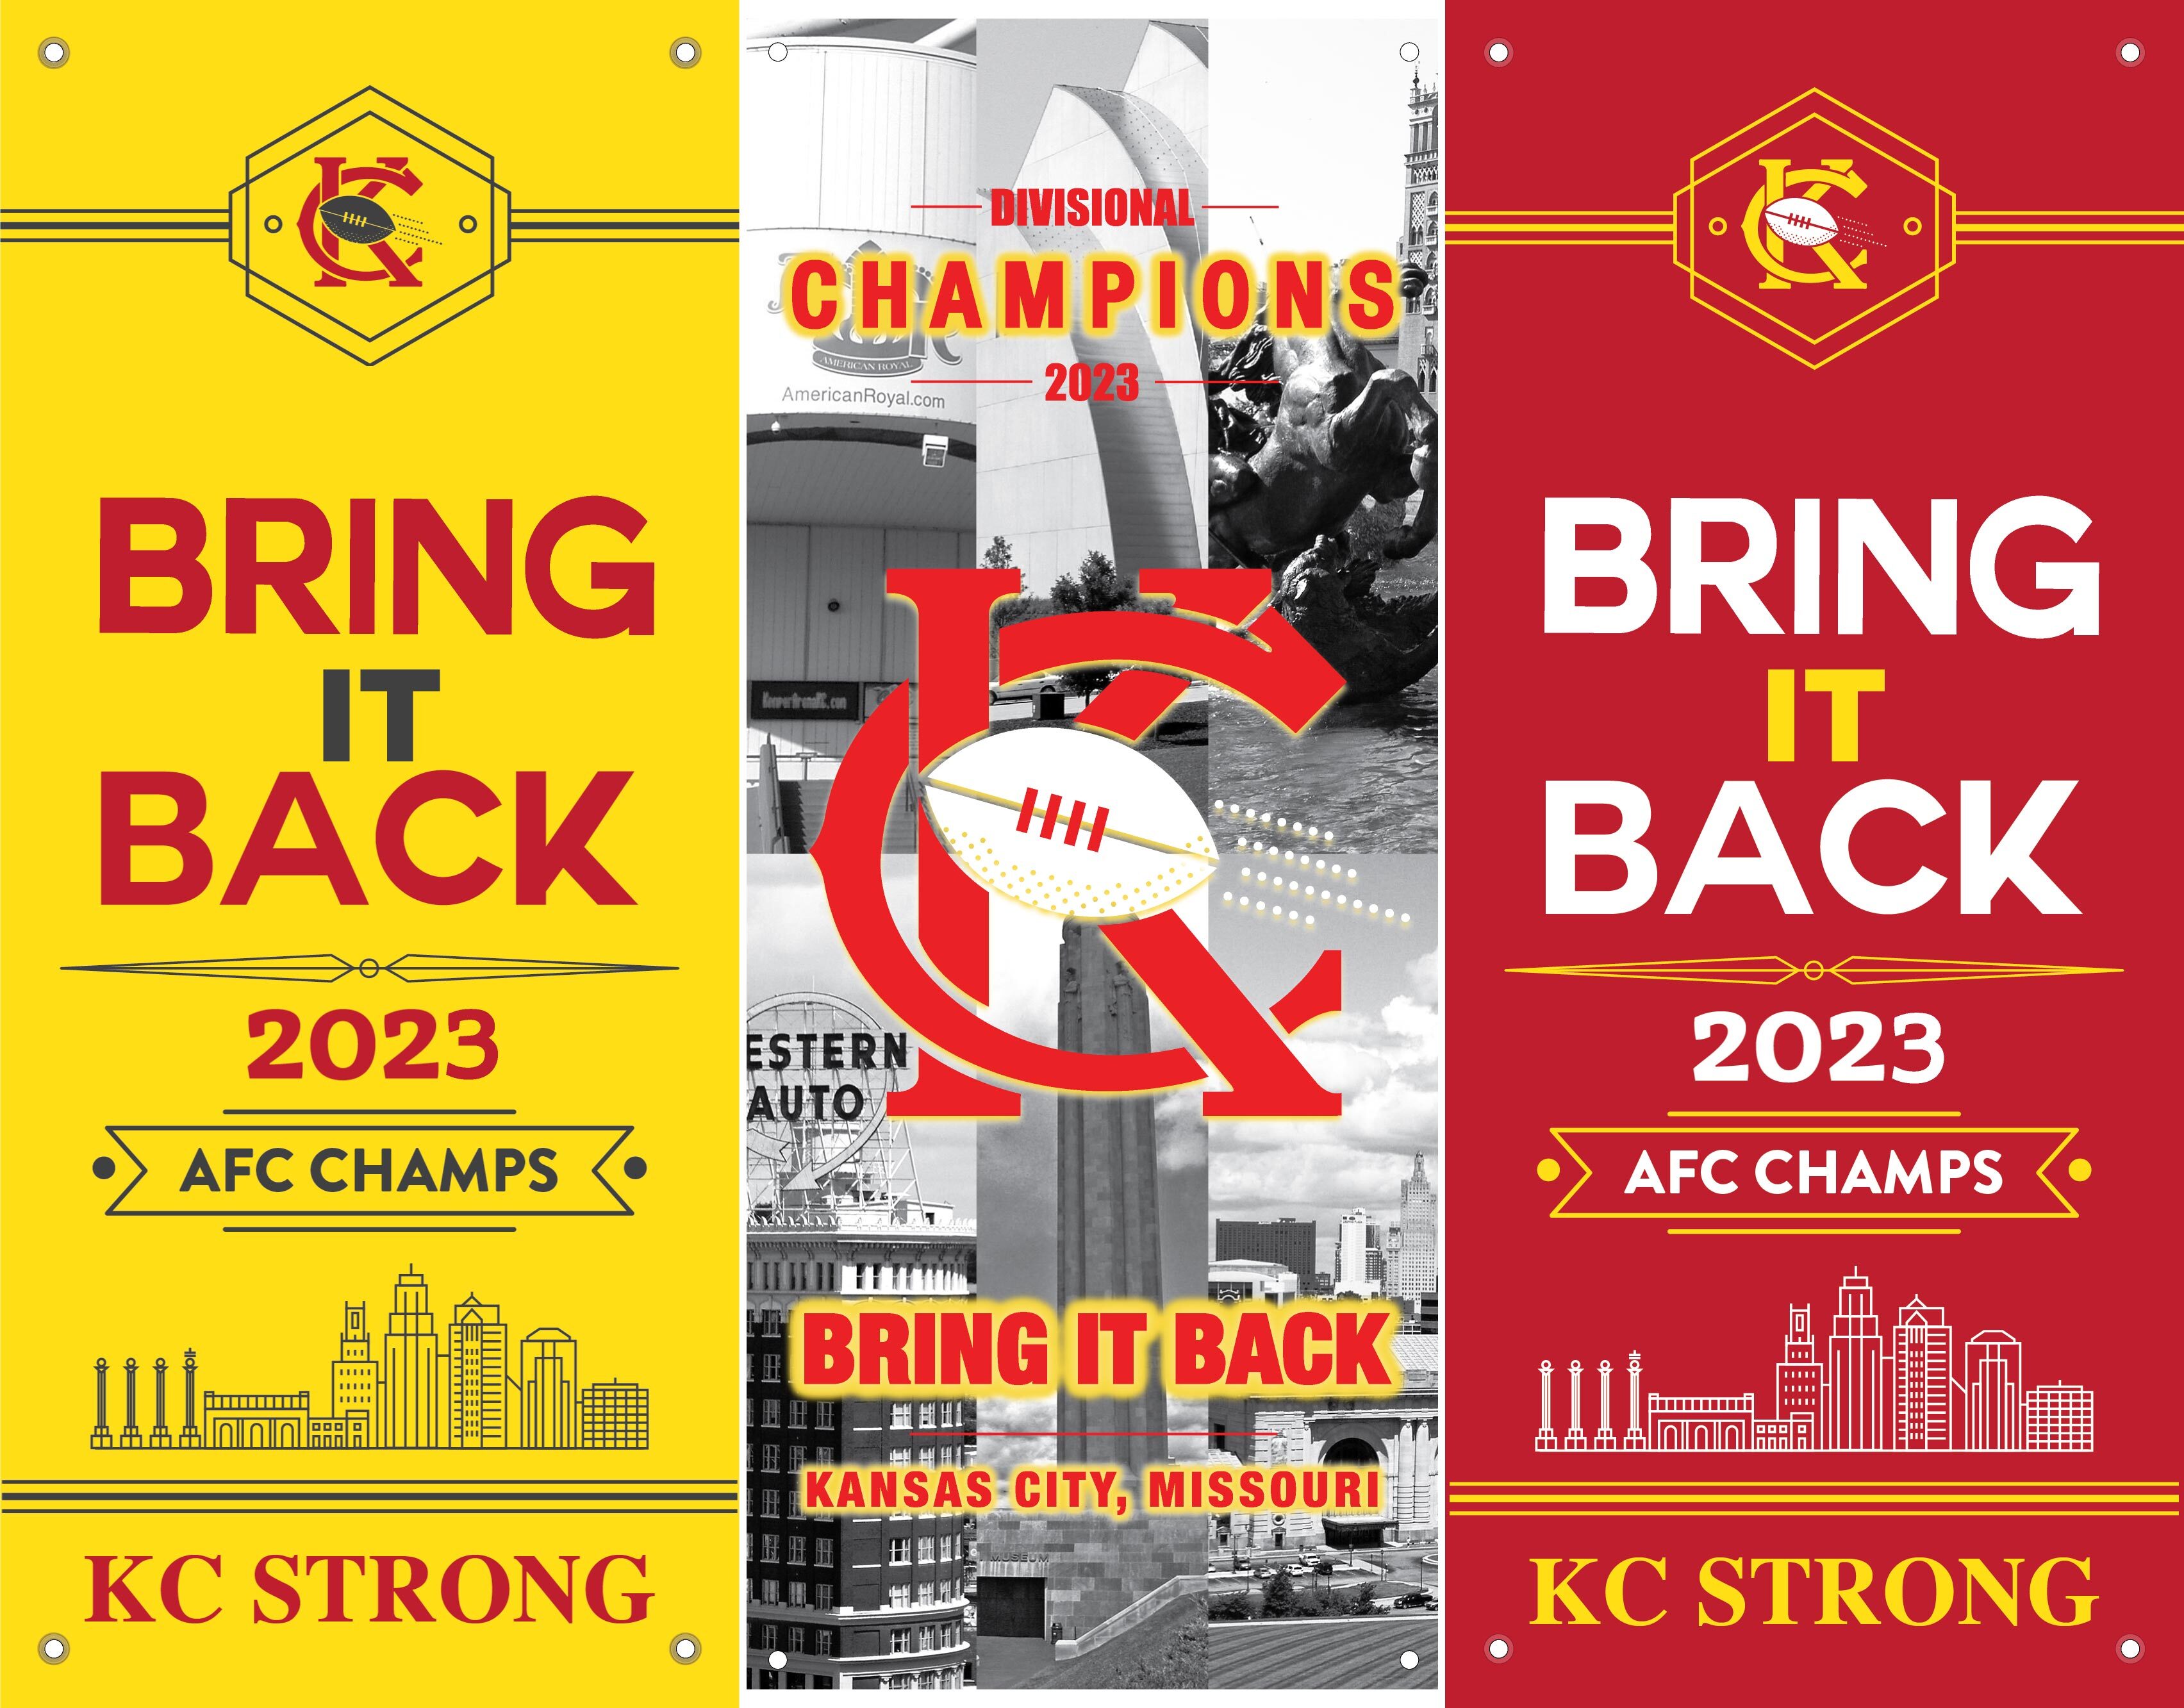 3 - "BRING IT BACK"  CHAMPIONS Banners